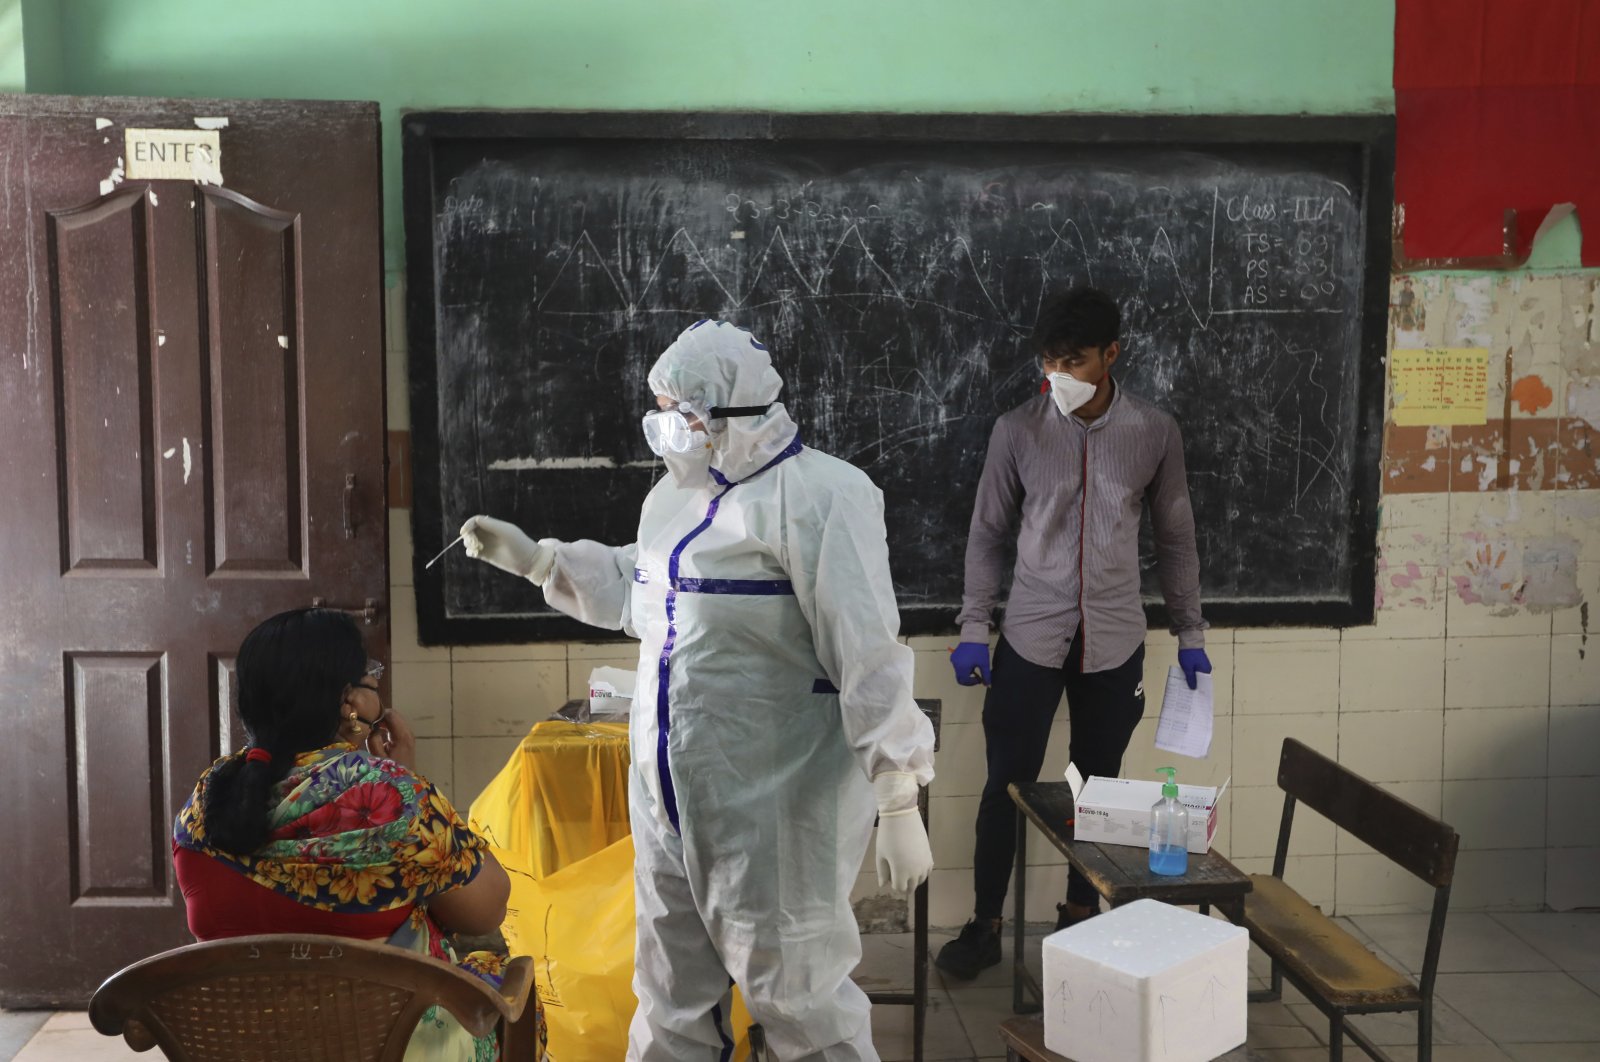 A health worker takes a swab sample of a woman for a COVID-19 test in New Delhi, India, June 24, 2020. (AP Photo)